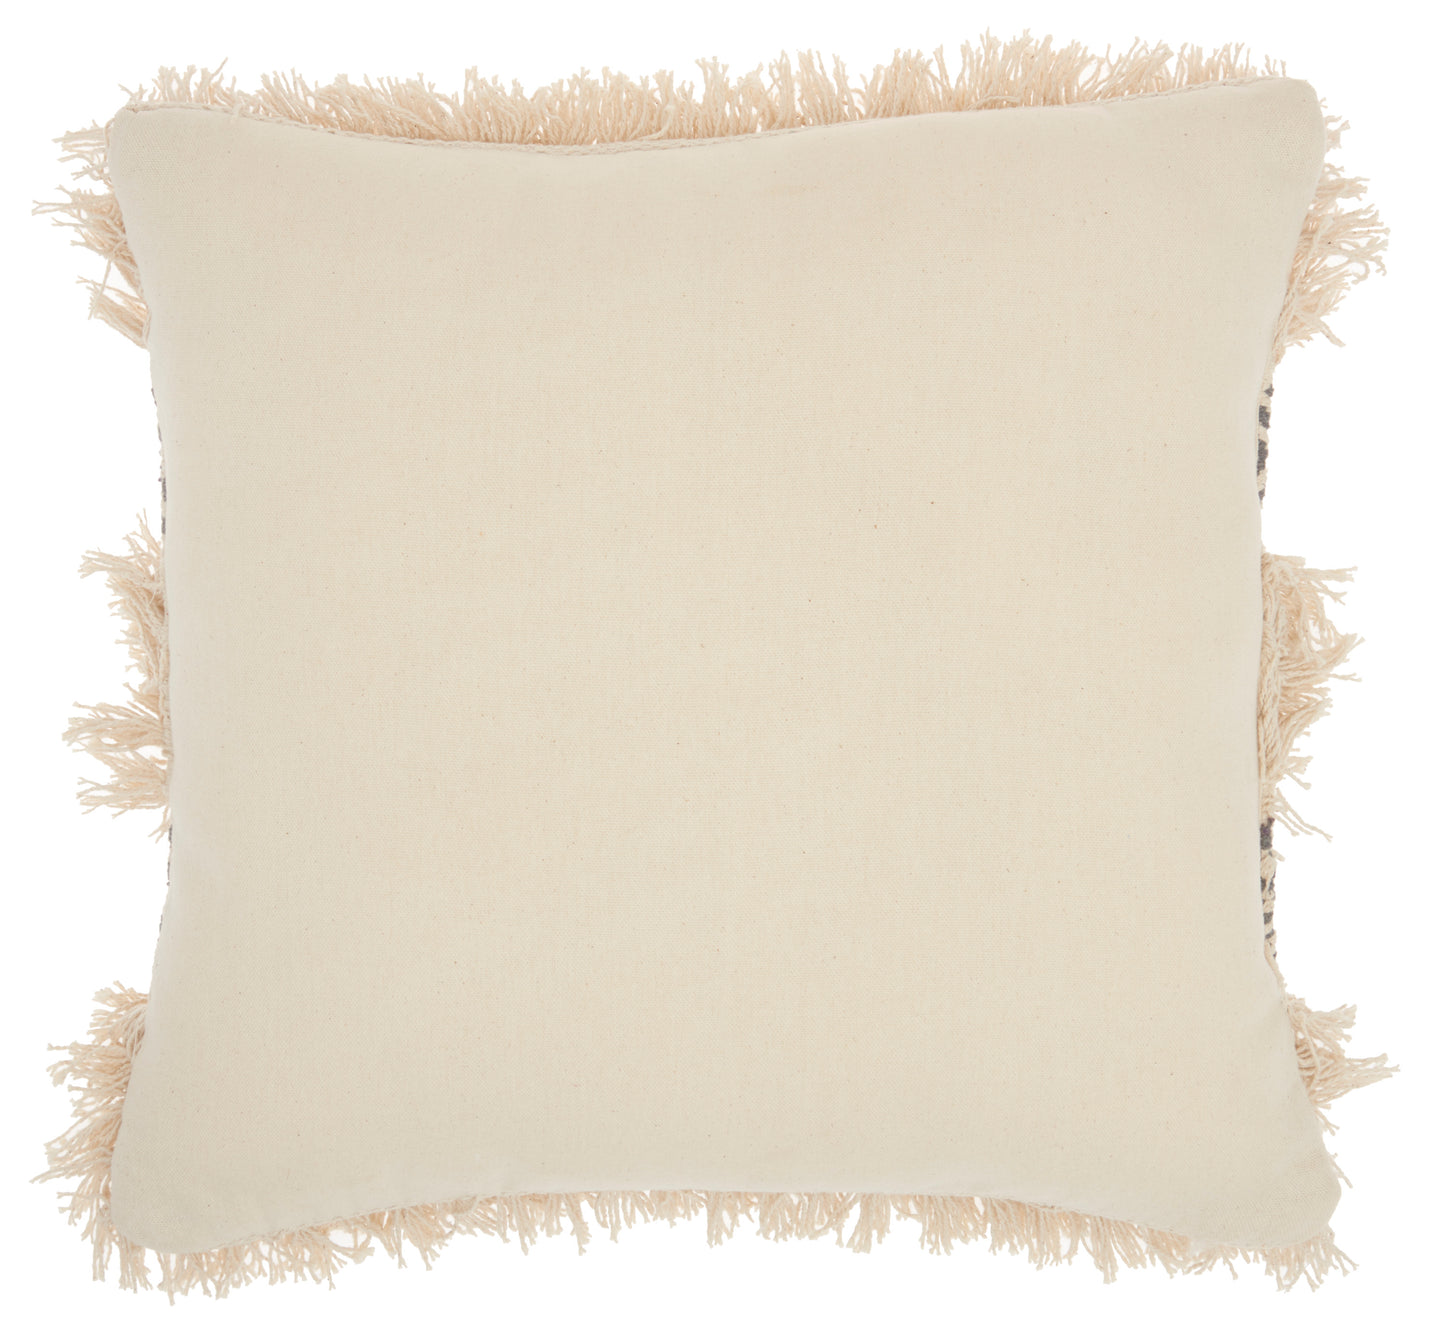 Life Styles DL033 Cotton Diamond Stripe Textu Throw Pillow From Mina Victory By Nourison Rugs